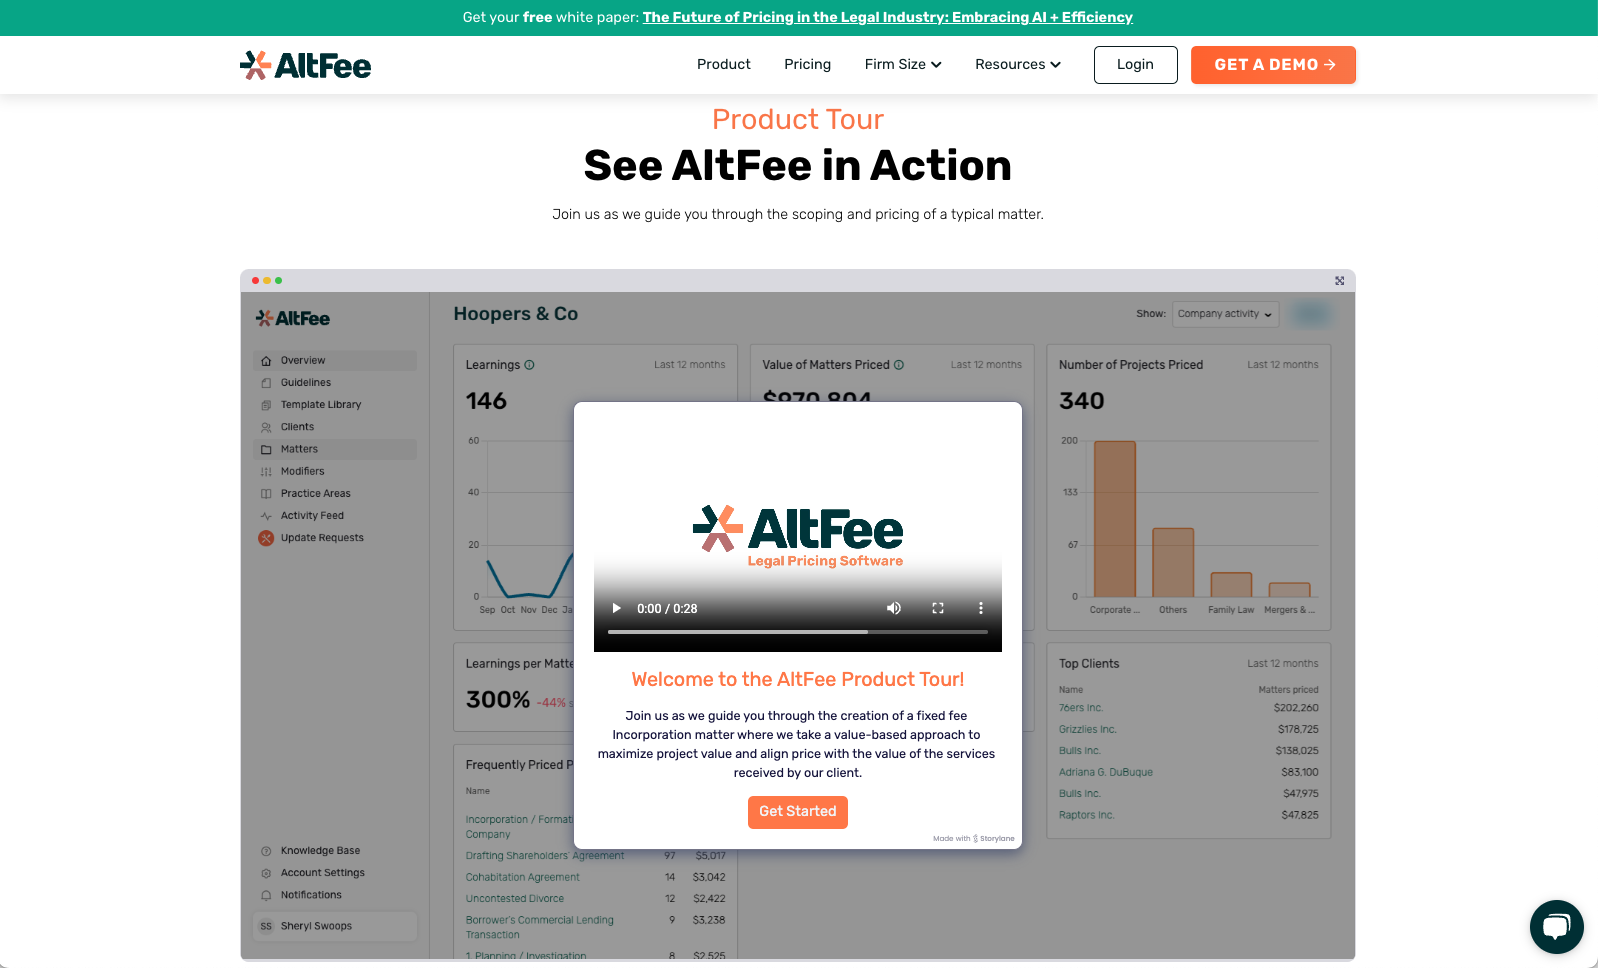 AltFee Product Tour